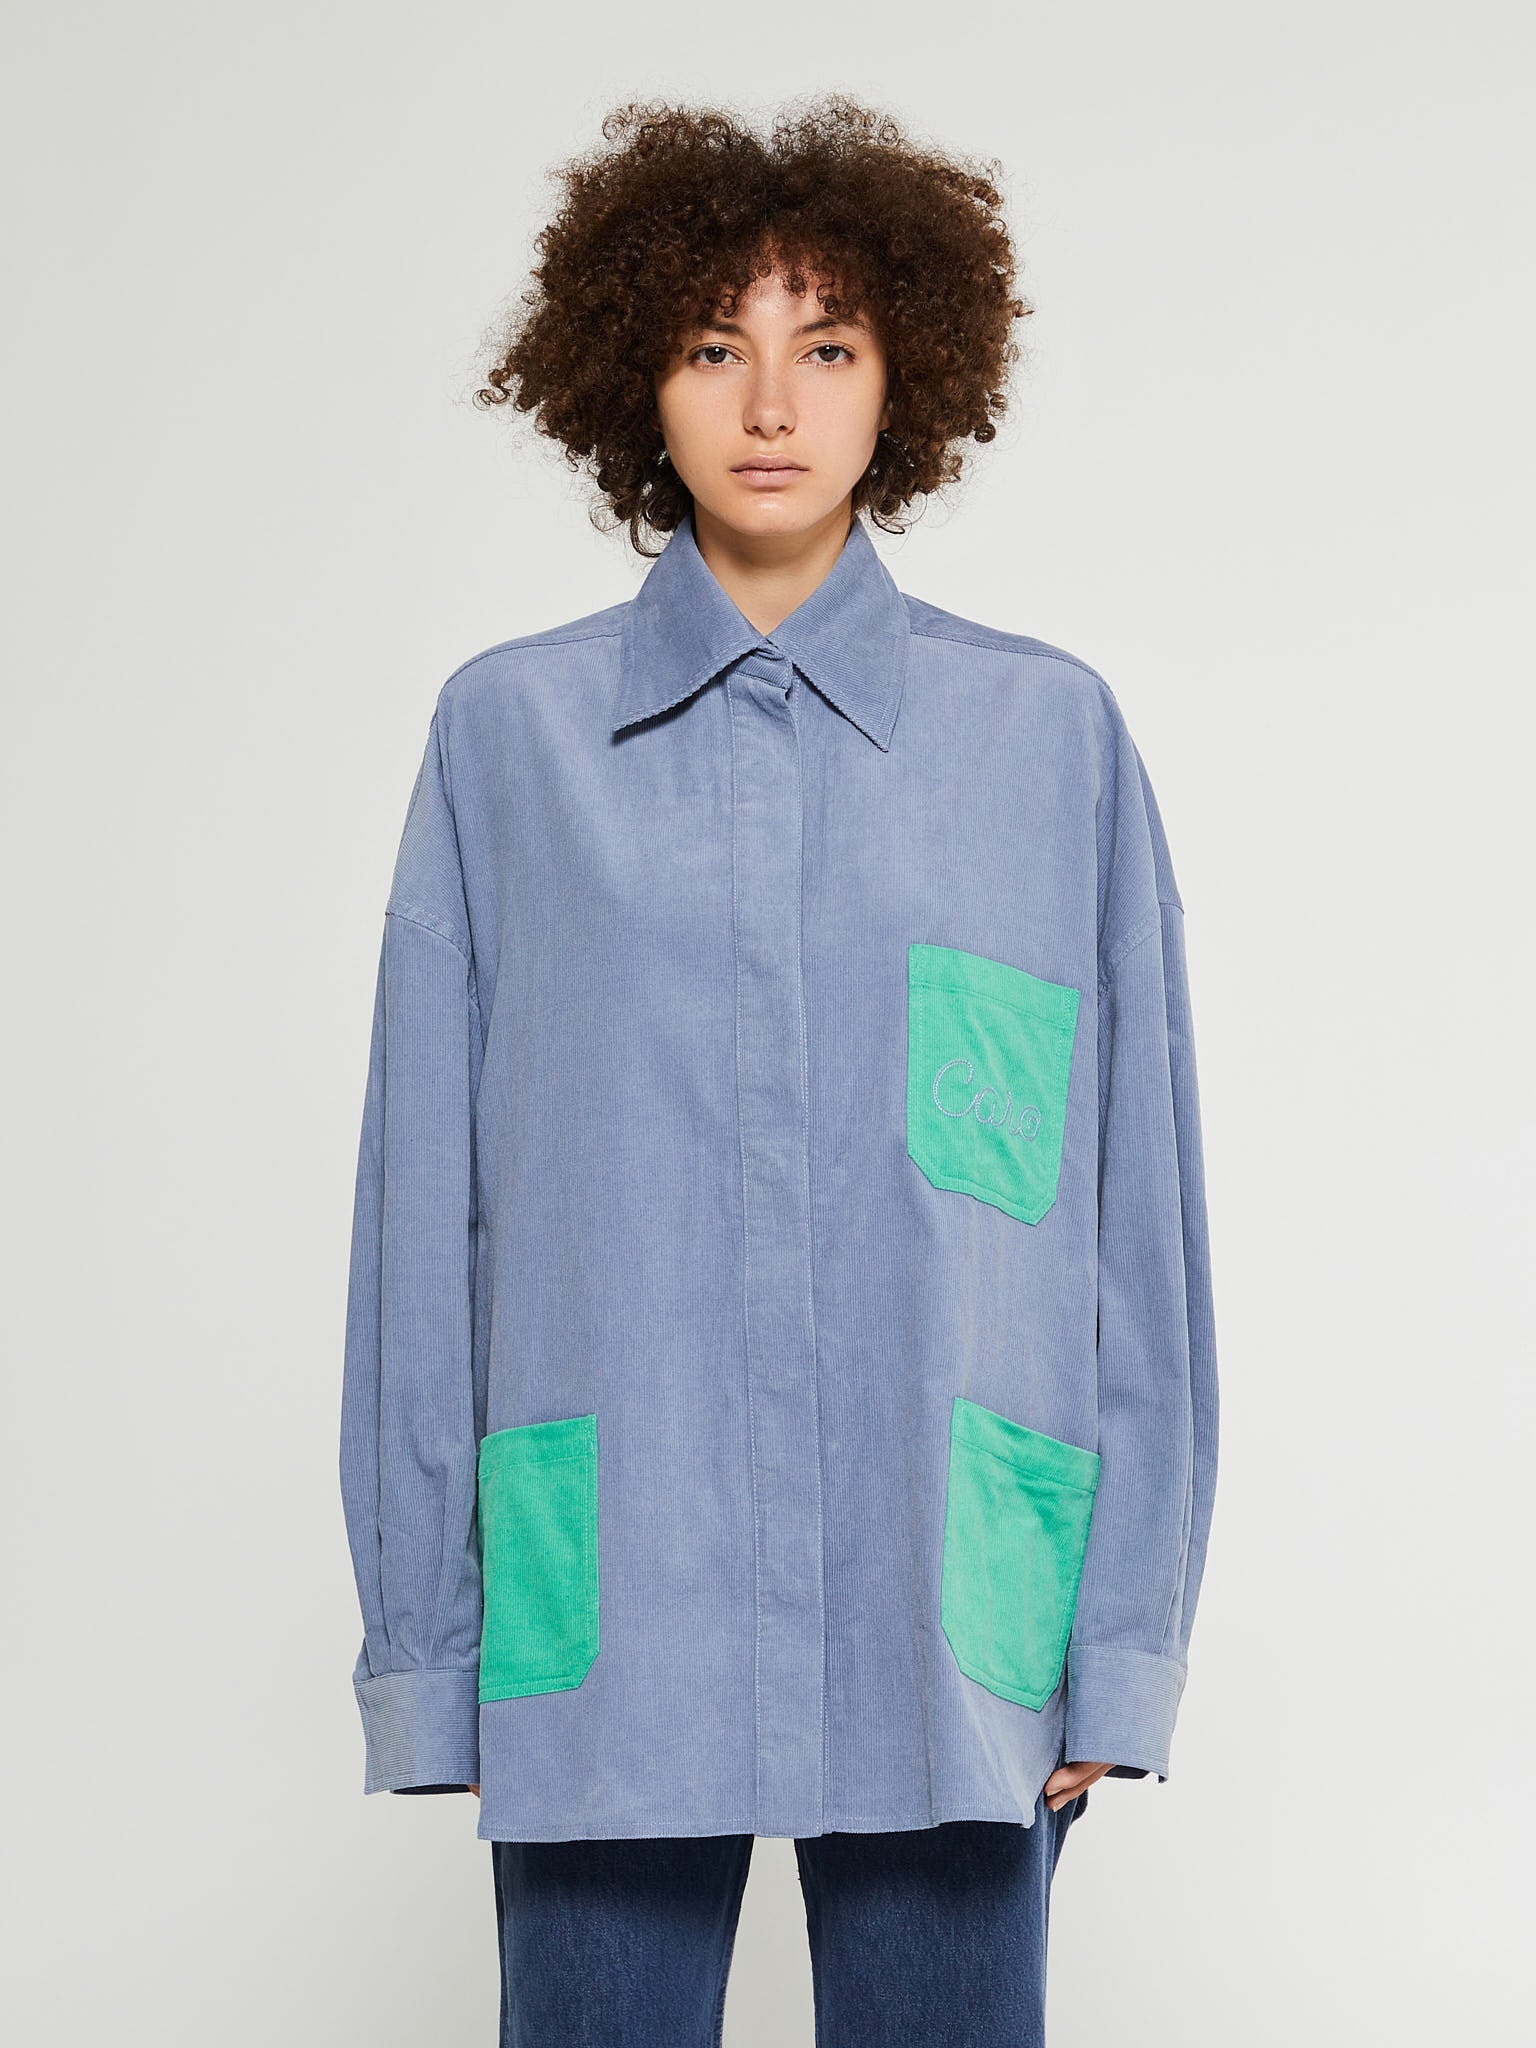 CARO Editions - Frederik Shirt in Dove Blue With Green